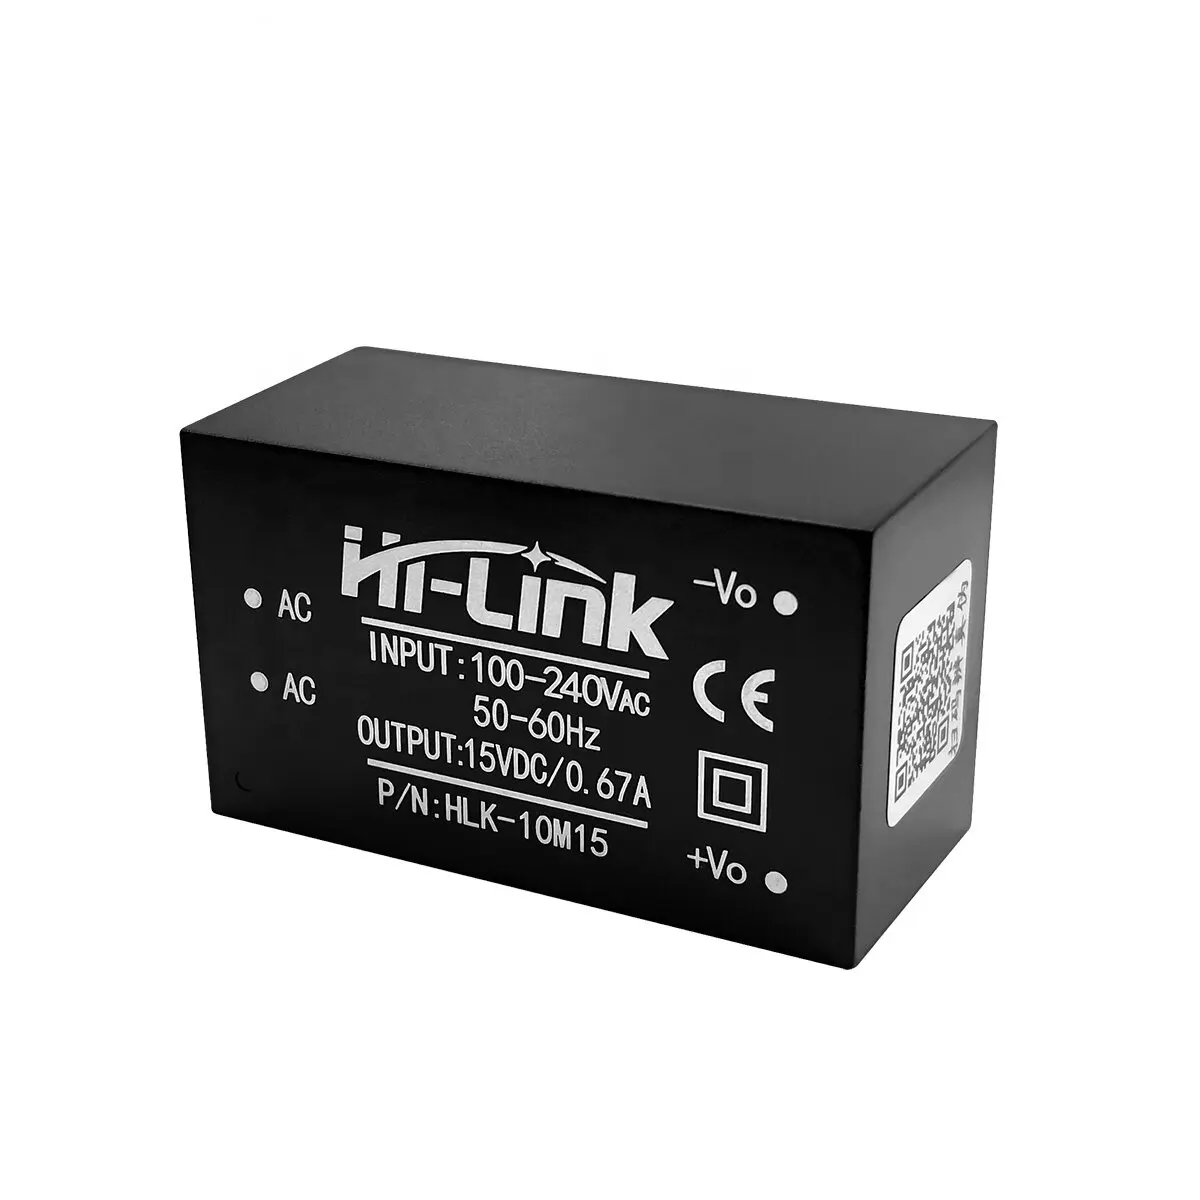 Hi-Link 220v 15V 10W AC DC Isolated Intelligent Household Compact Switching Power Supply Module HLK-10M15